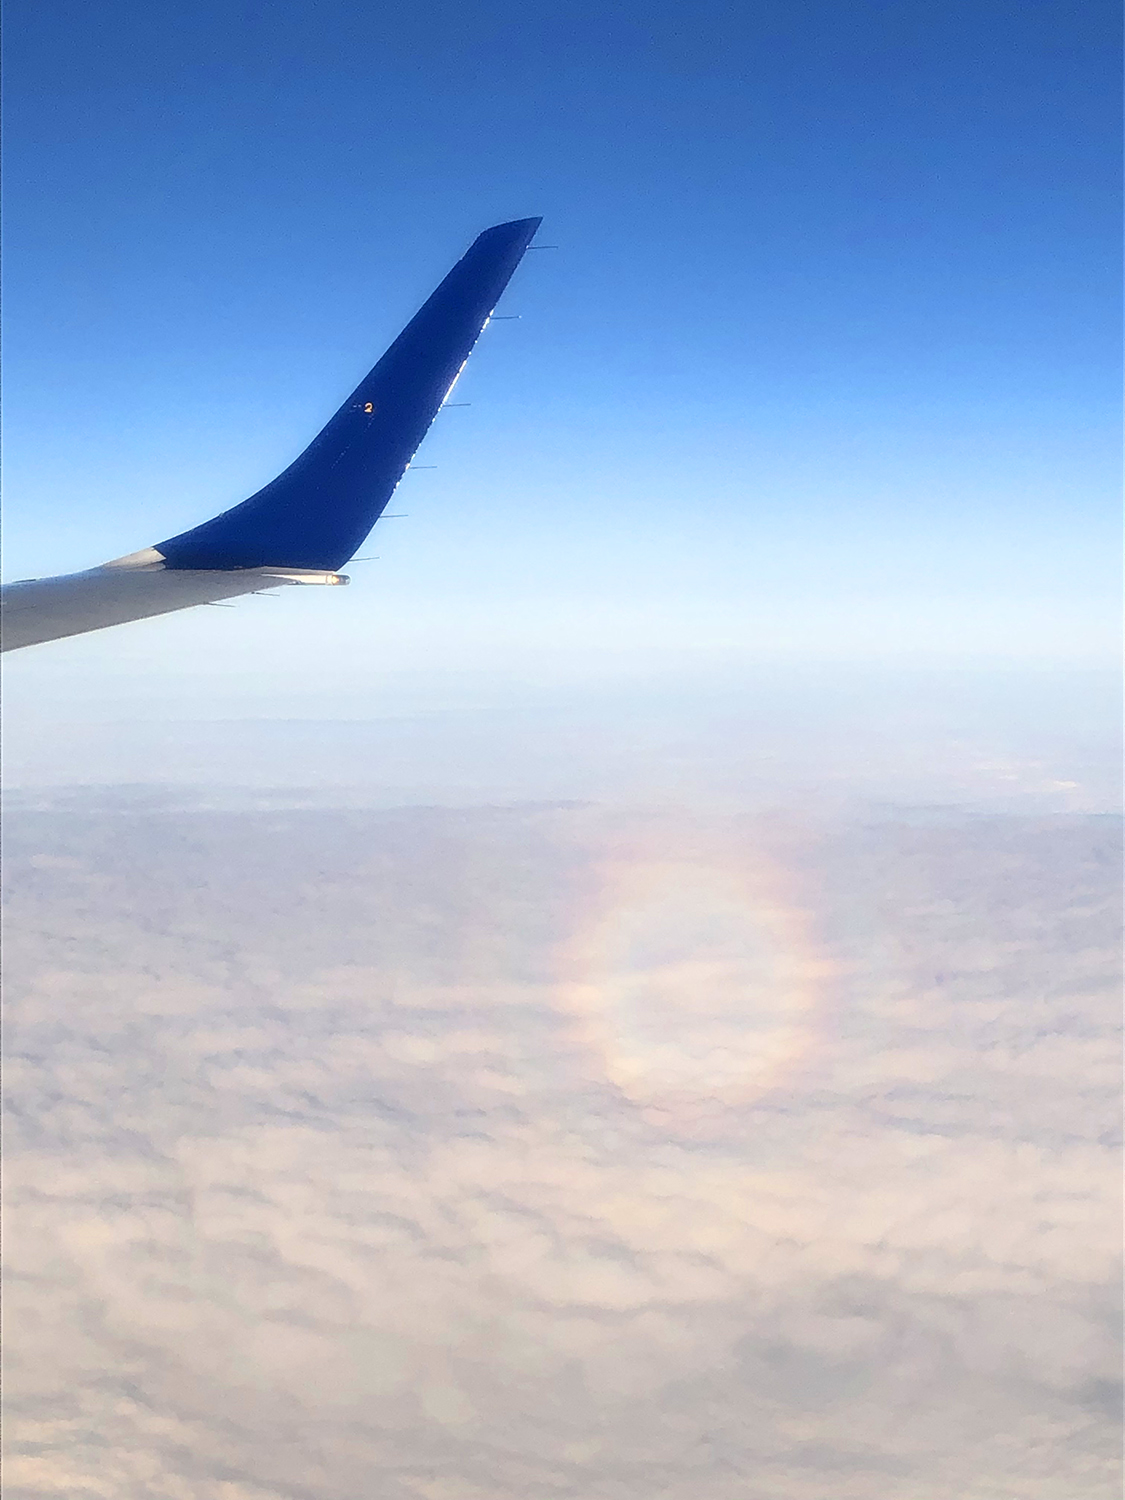 iPhone photograph of a full-circle rainbow called a glory as seen from an airplane window